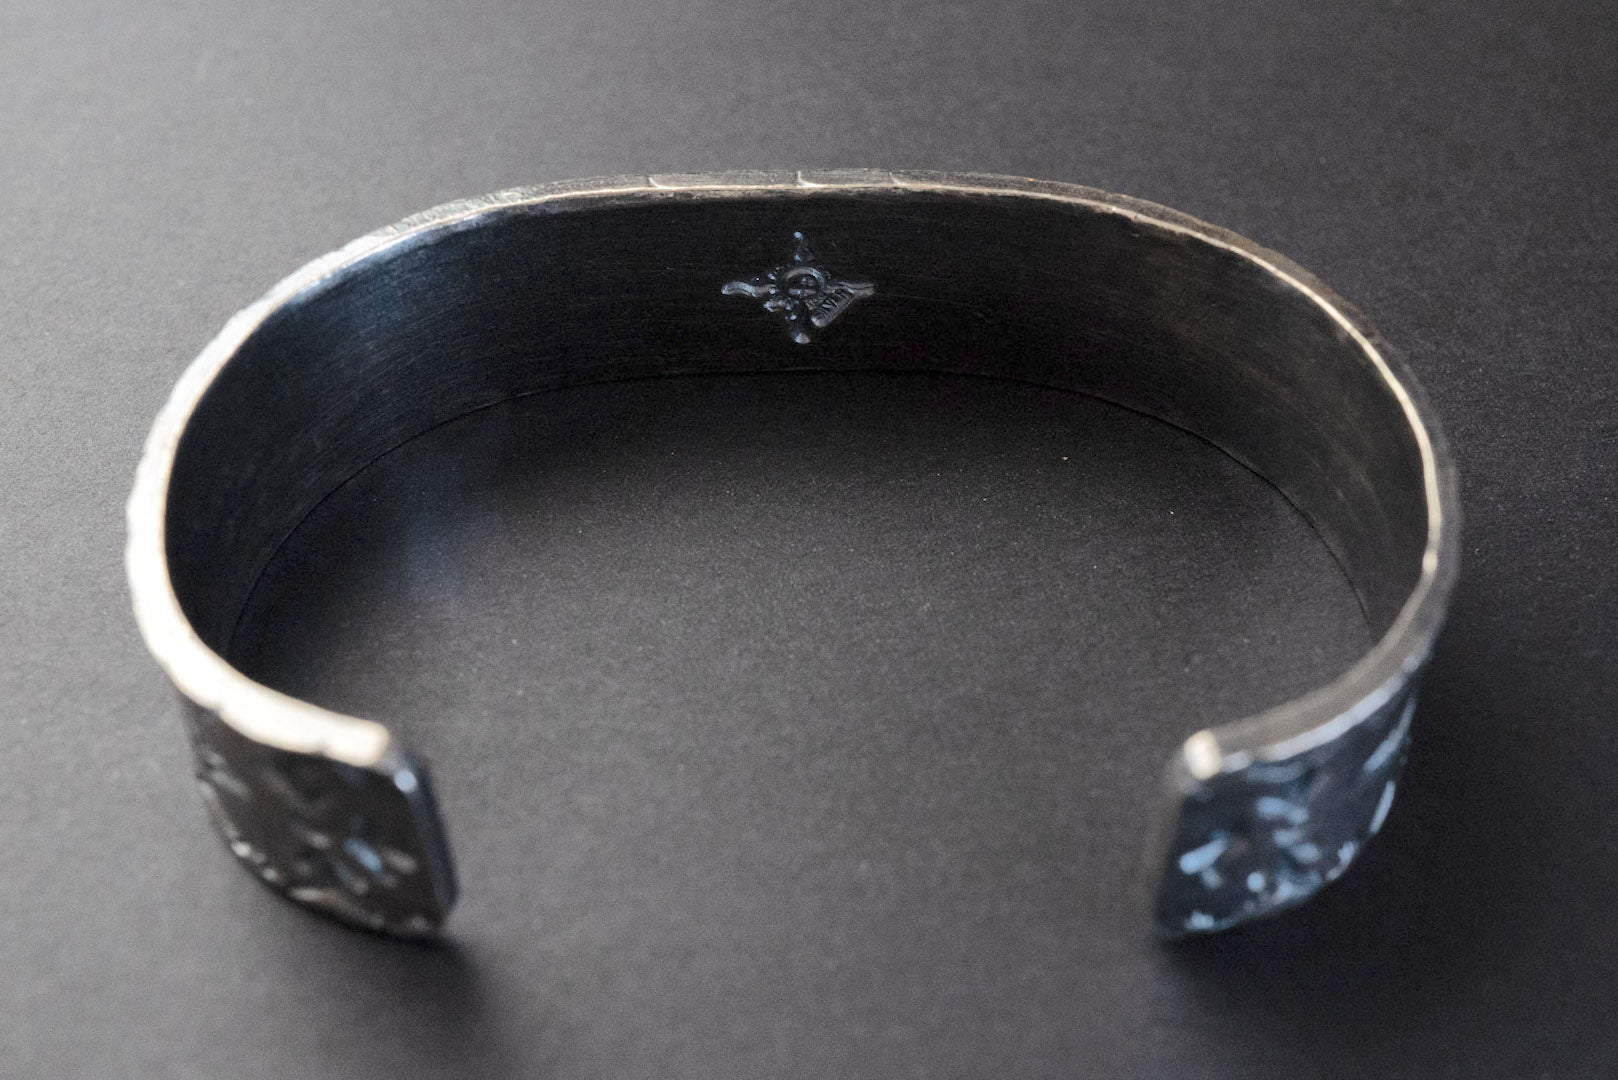 First Arrow's "Arrow Stamp" Bangle With "Soulo" Stone (BR-312)